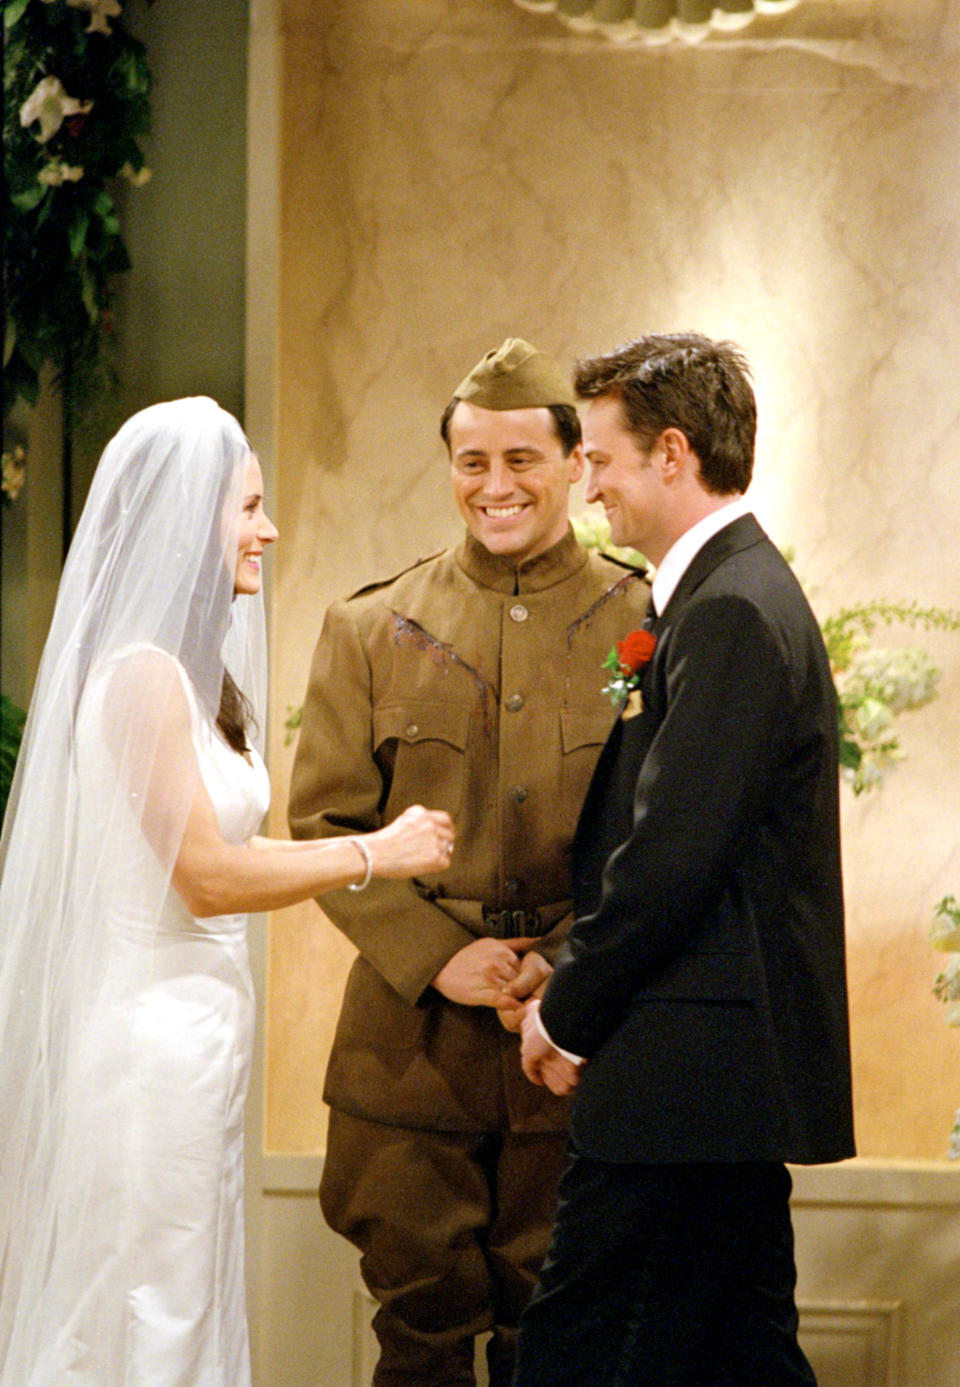 Monica and Chandler getting married